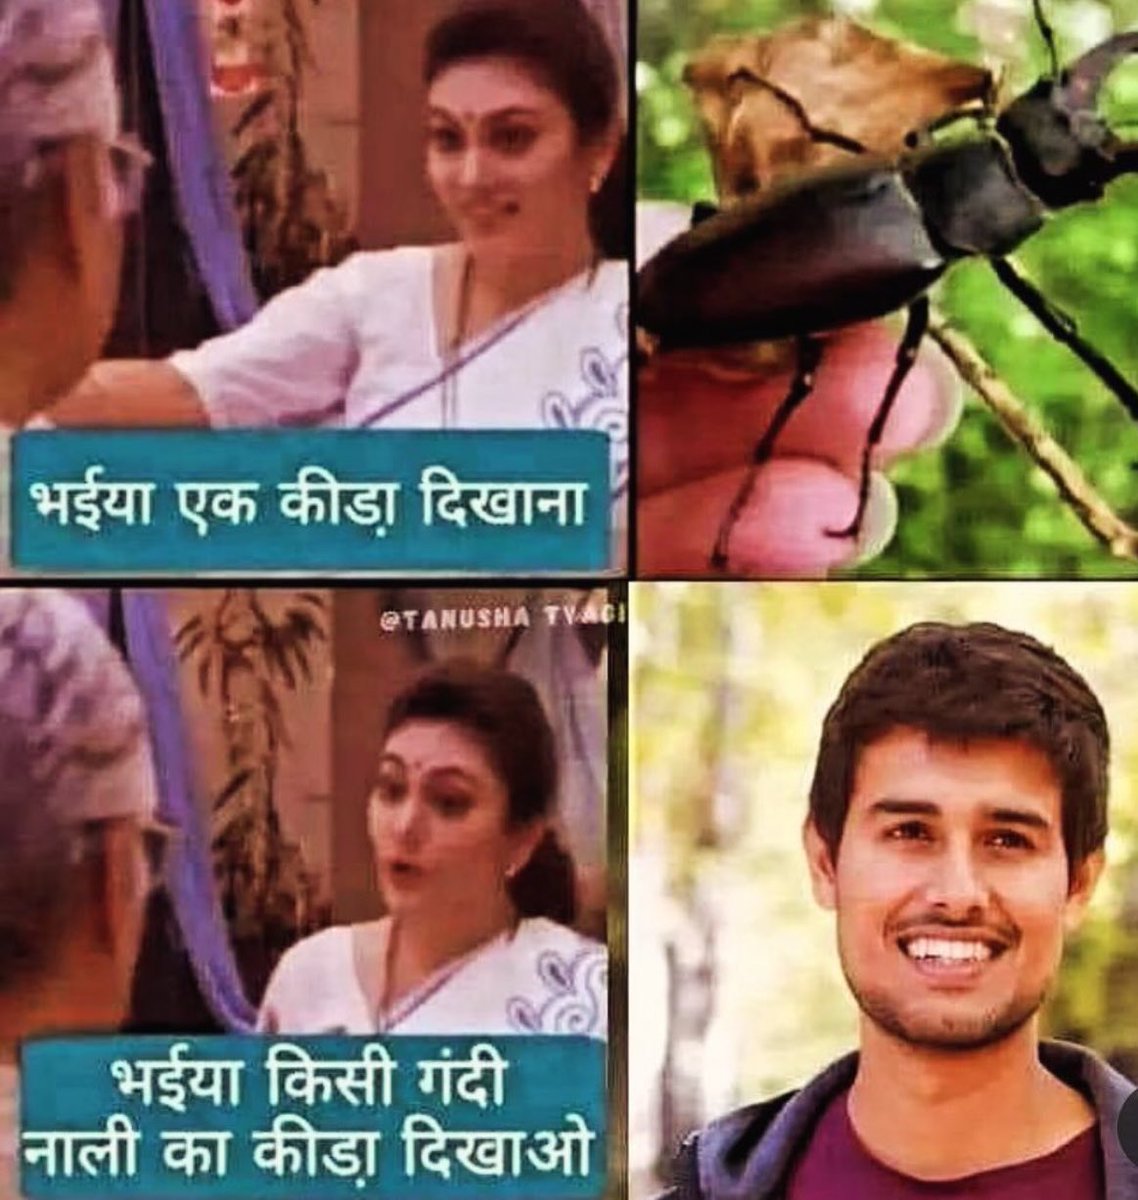 Will #DhruvRathee speak for #SwatiMaliwal? BTW pls stop sending me such memes- then I have to share them 😭😭